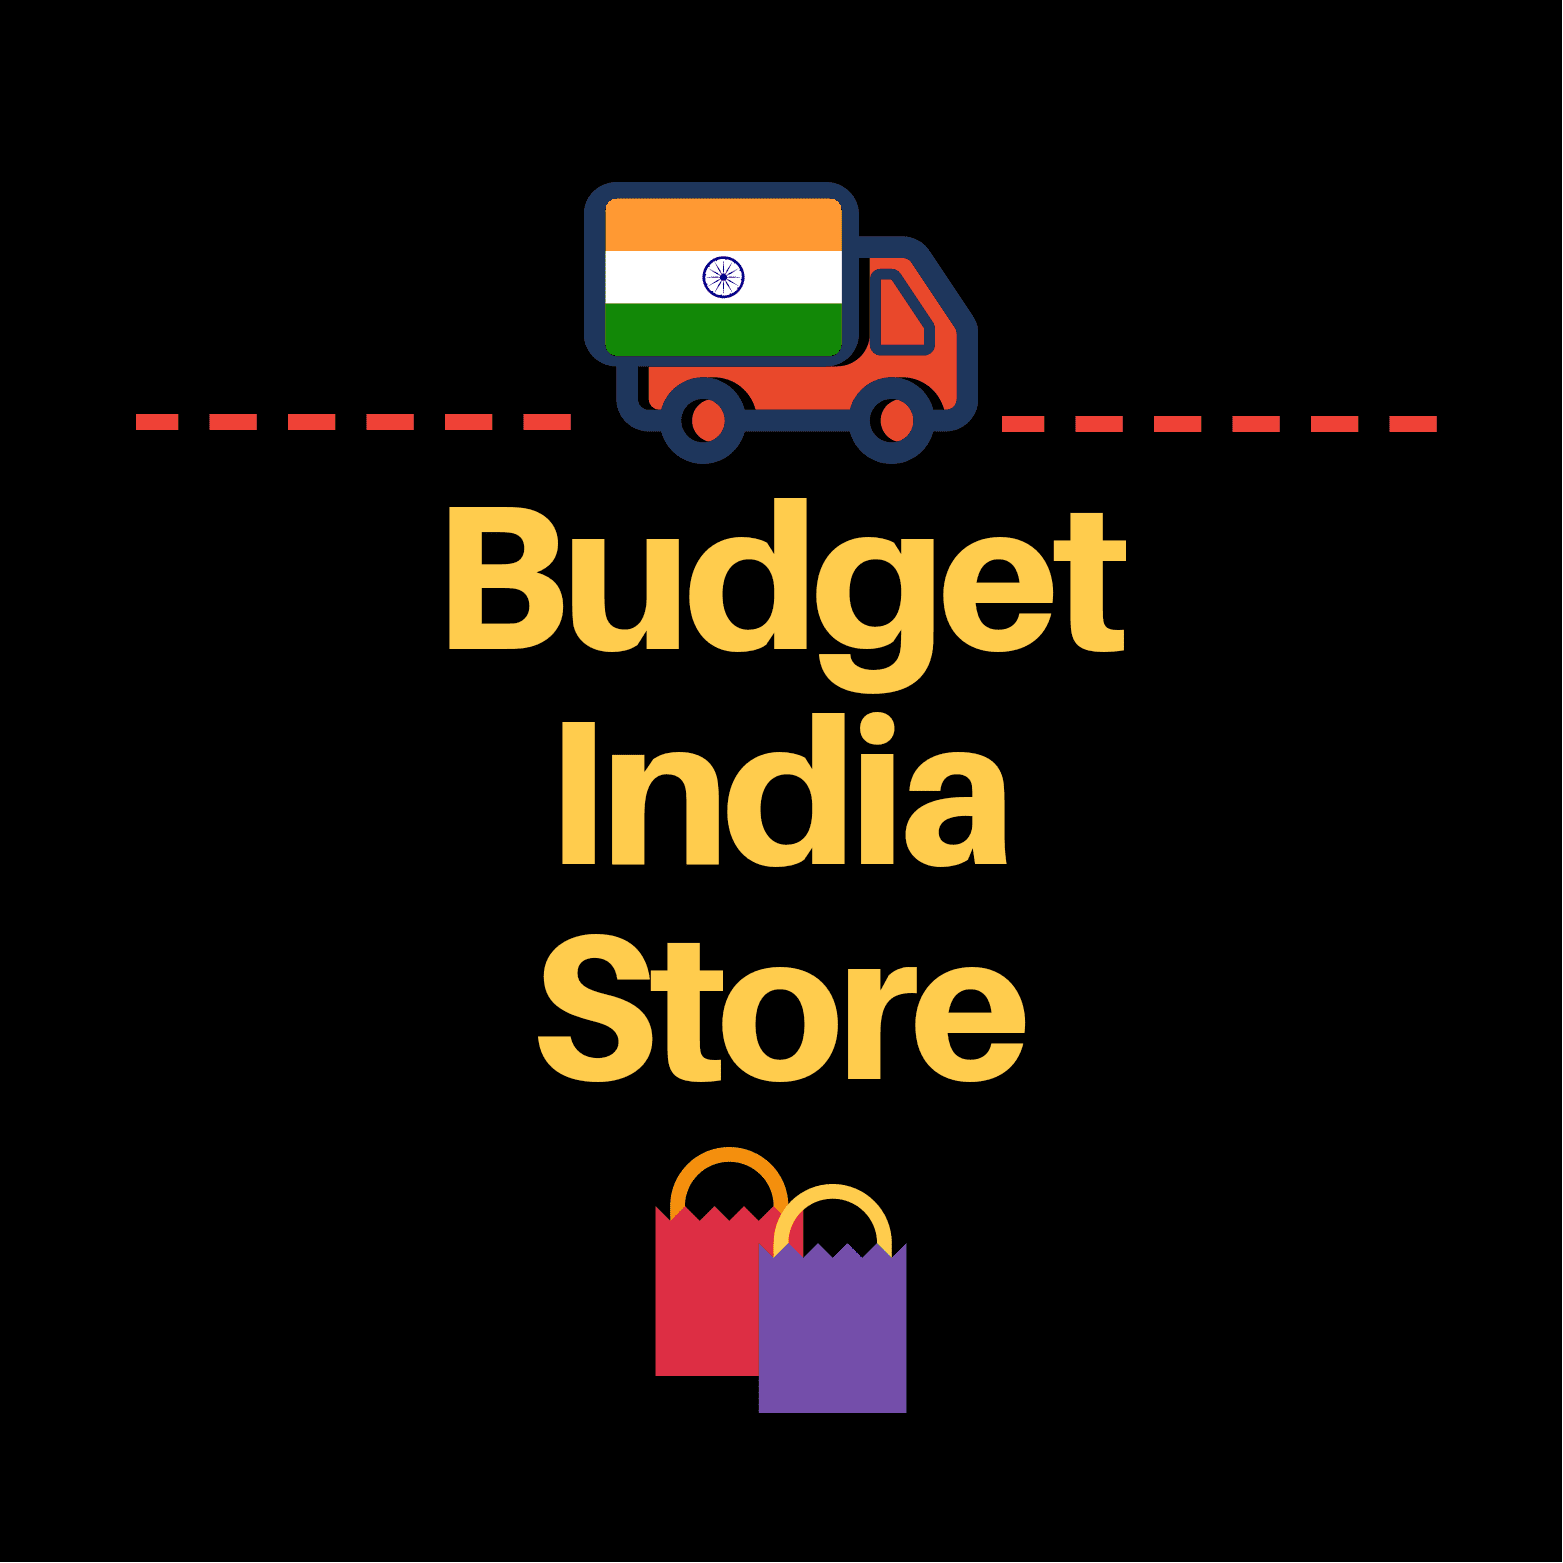 Budget India Store